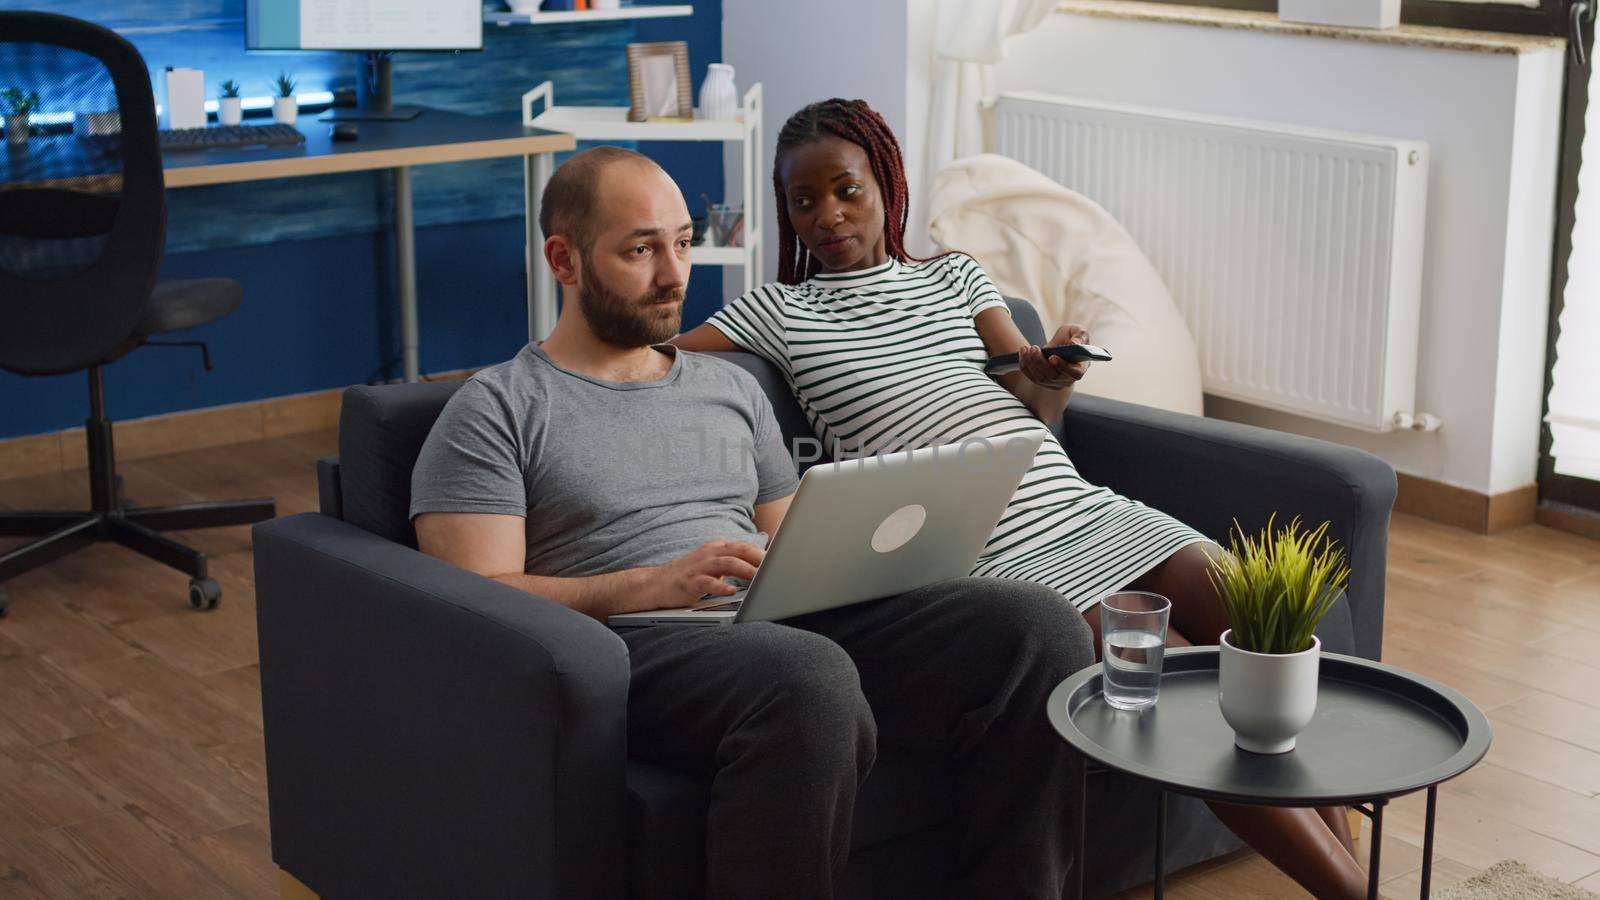 Interracial couple with pregnancy relaxing together at home. Pregnant black woman switching channels with TV remote control and caucasian man using laptop while sitting in living room